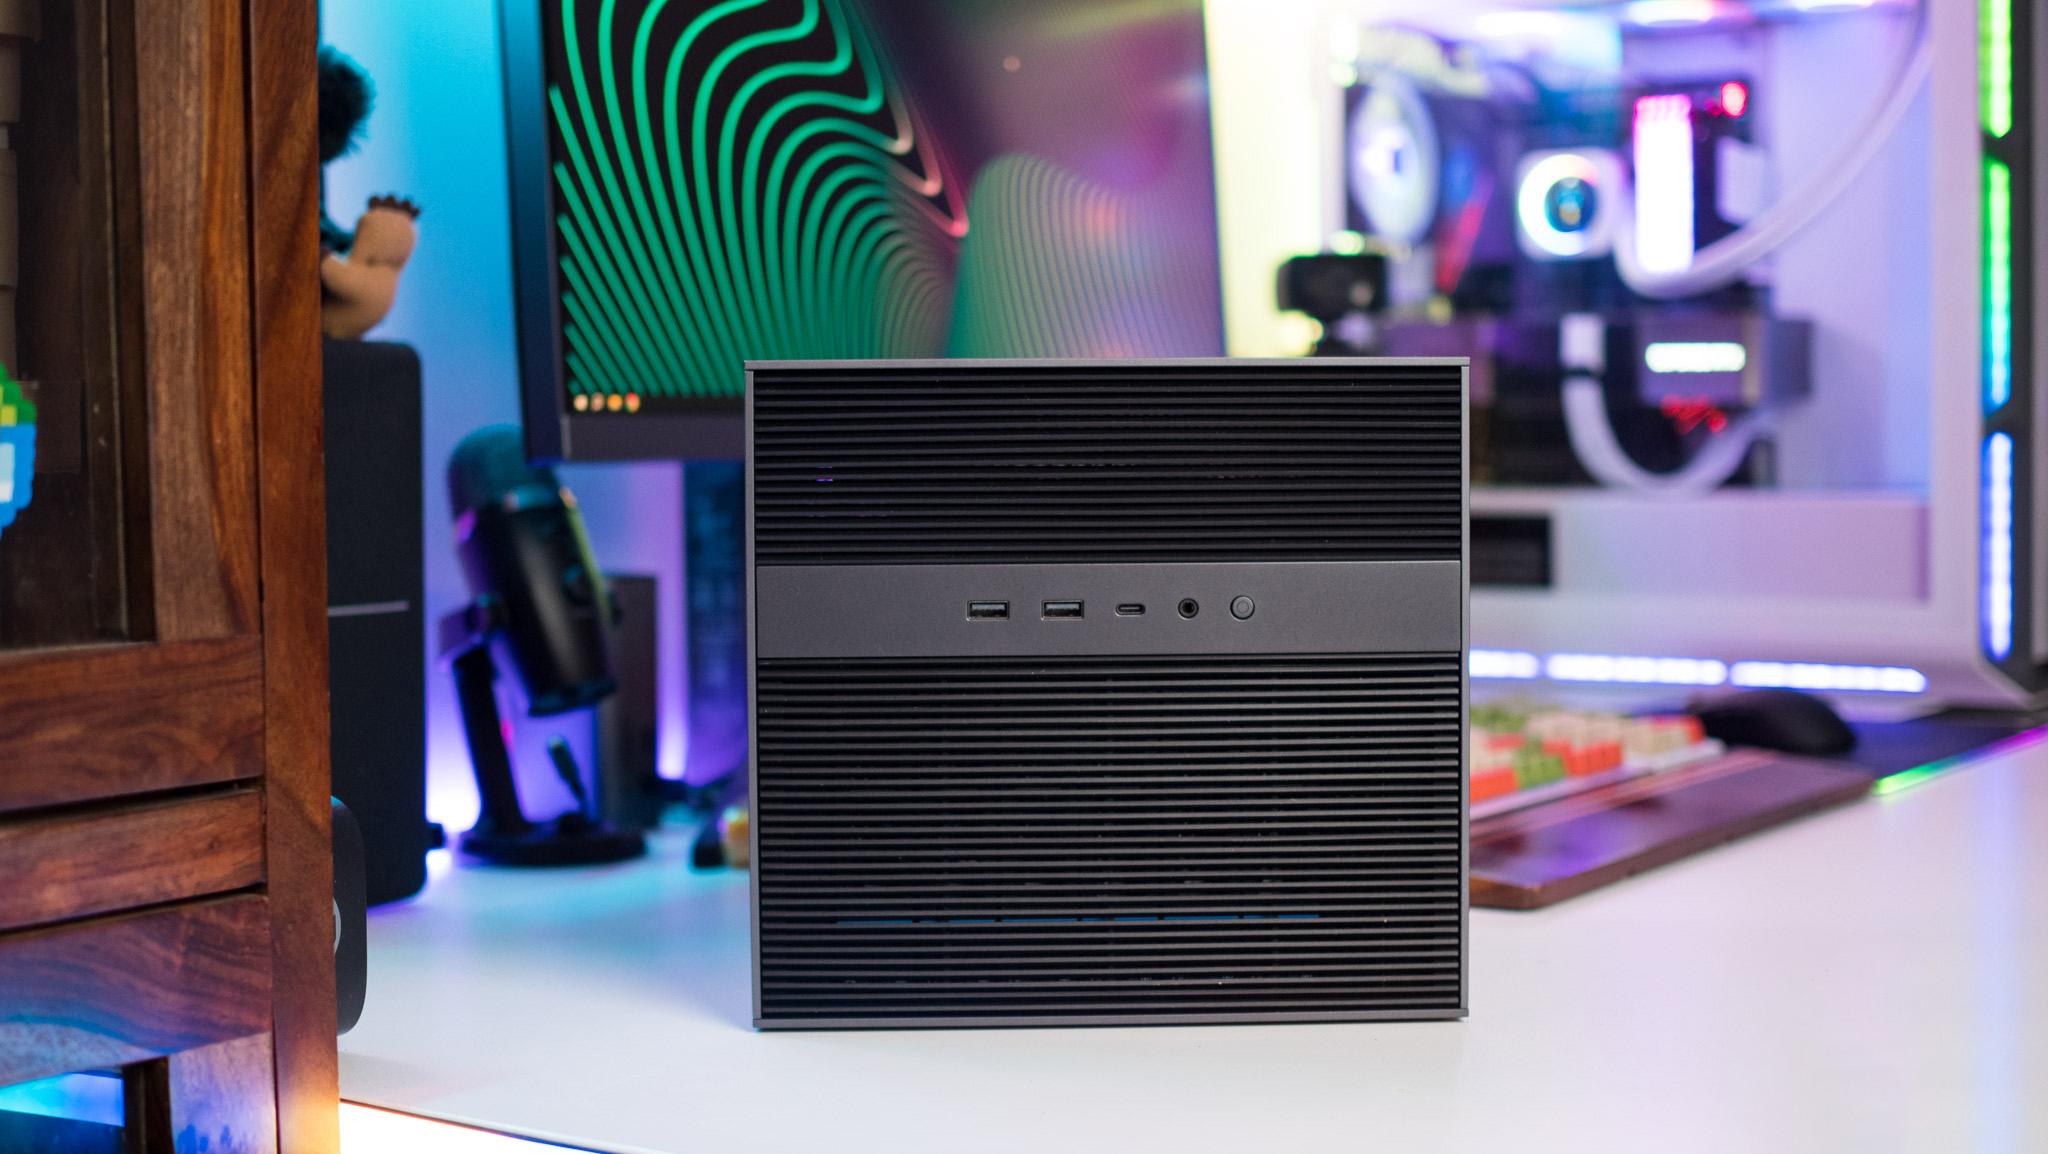 ZimaCube NAS hands-on: This 6-bay NAS has a lot of potential